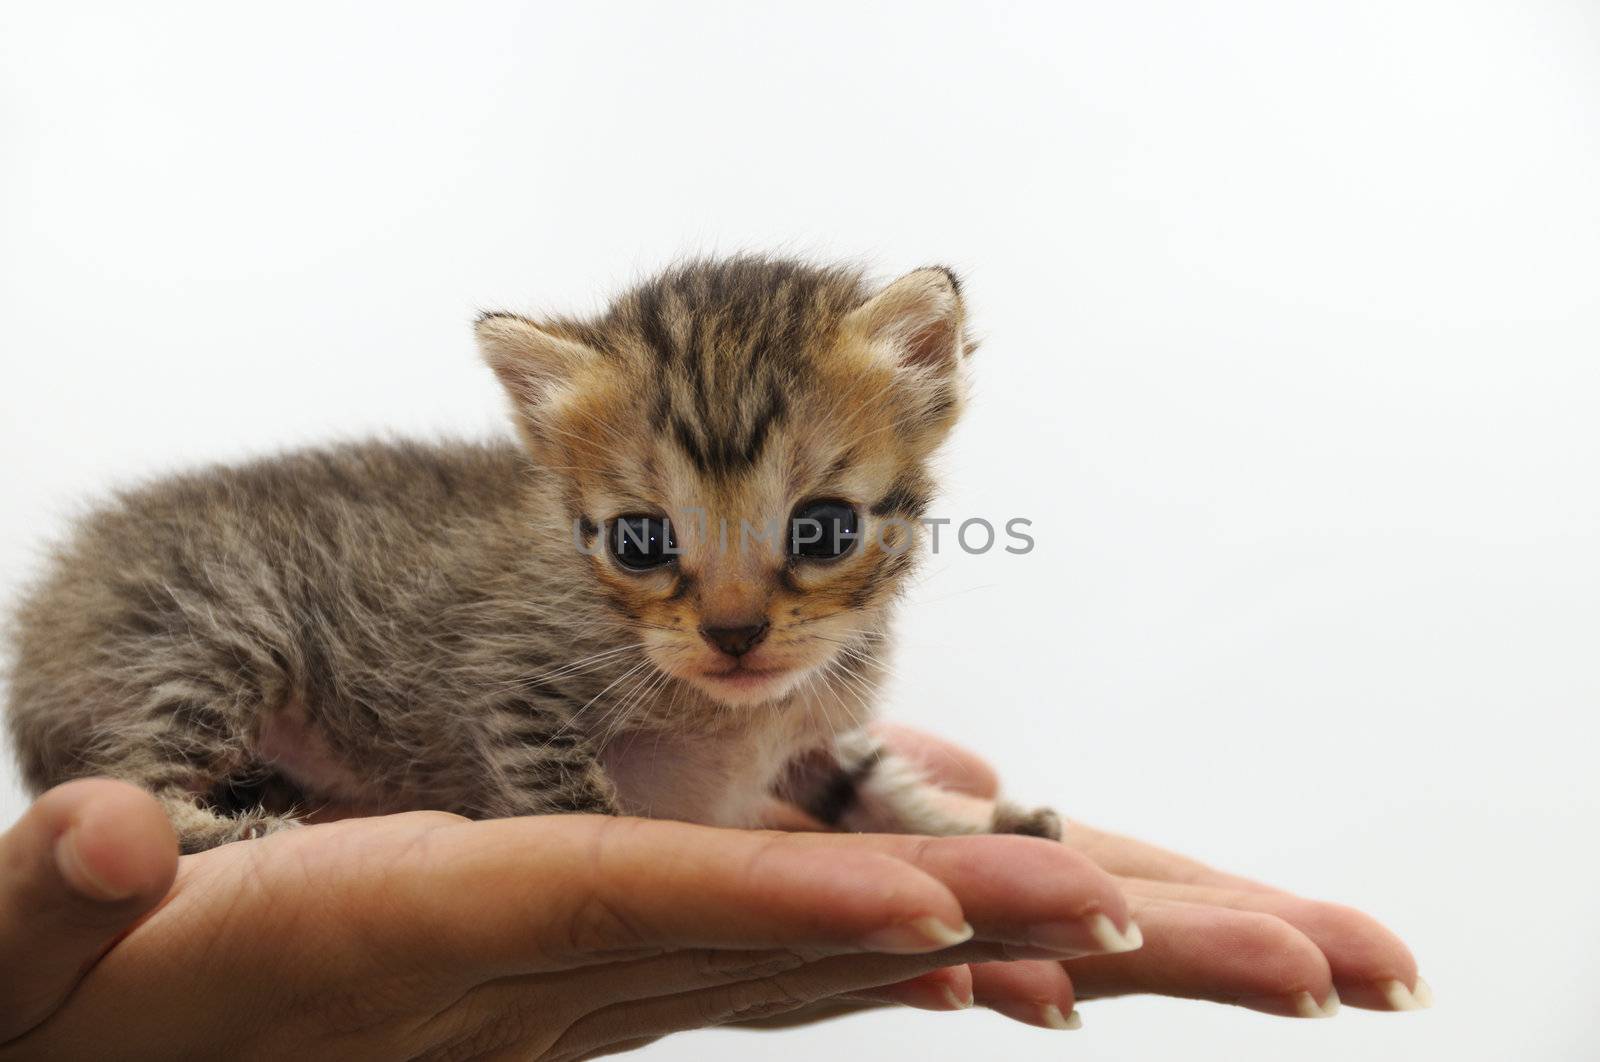 Tiny kitten - animal protection concept by rgbspace